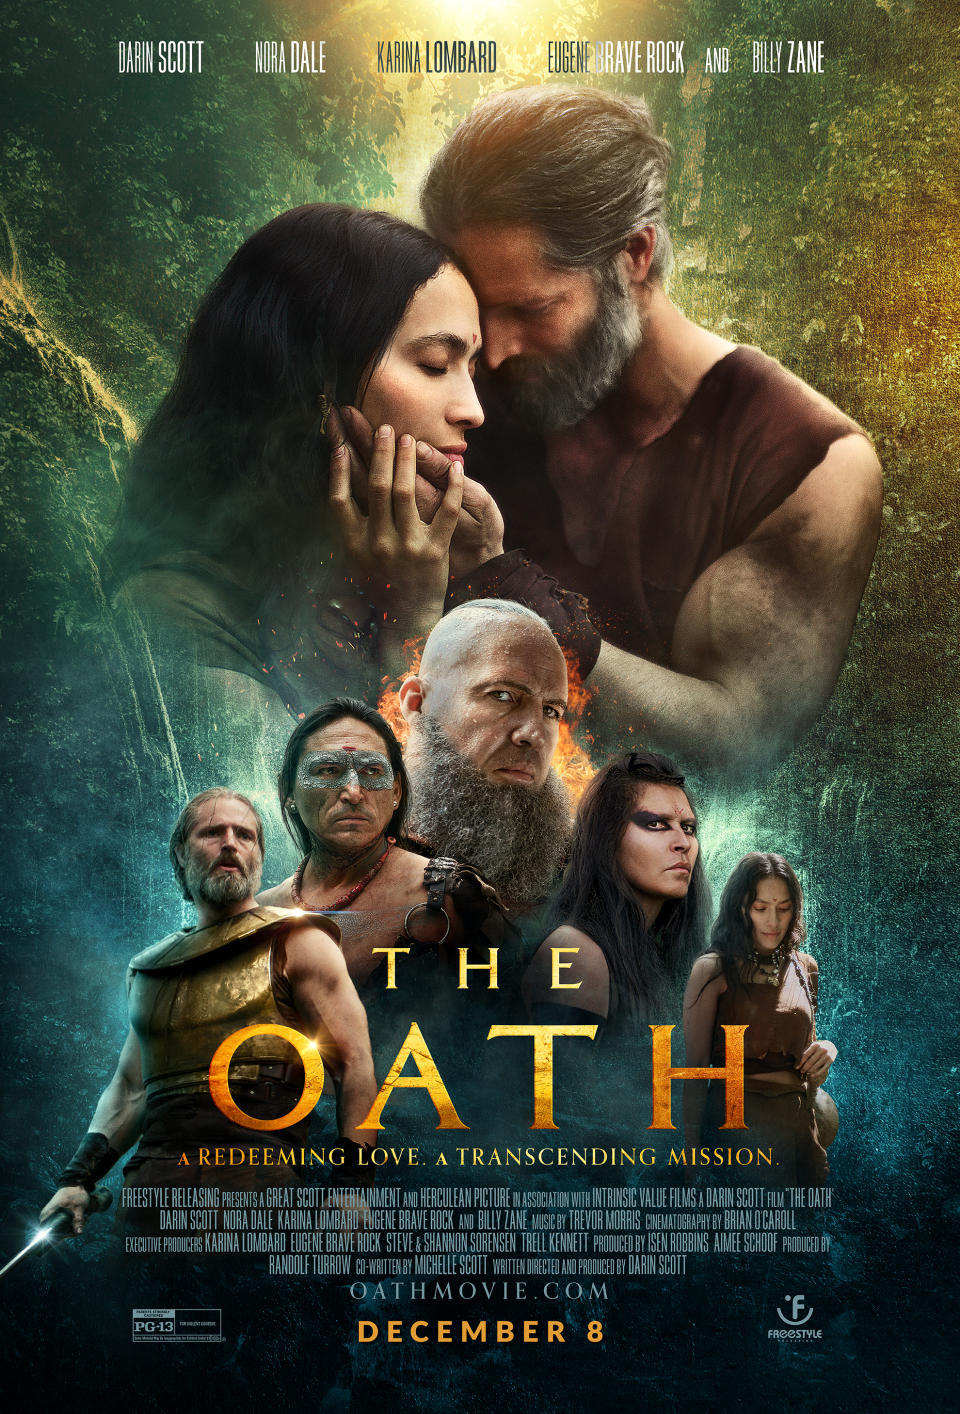 'The Oath' poster